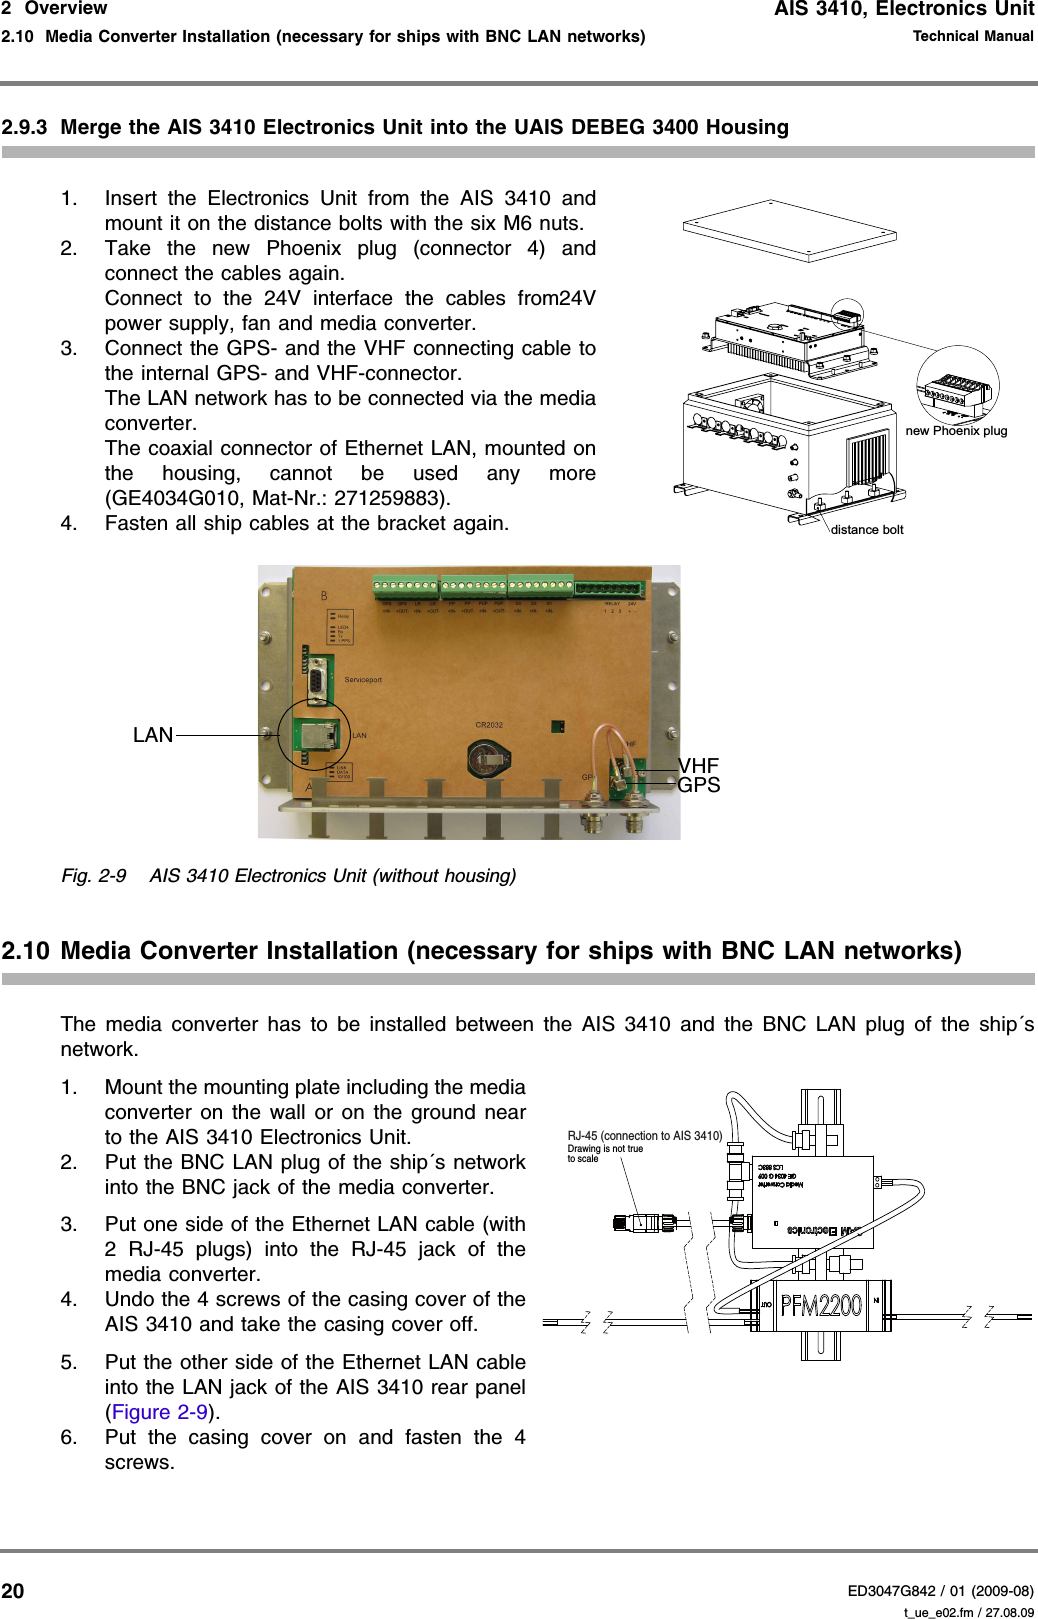 AIS 3410, Electronics UnitED3047G842 / 01 (2009-08)Technical Manual2  Overview2.10  Media Converter Installation (necessary for ships with BNC LAN networks) t_ue_e02.fm / 27.08.09202.9.3 Merge the AIS 3410 Electronics Unit into the UAIS DEBEG 3400 Housing1. Insert the Electronics Unit from the AIS 3410 and mount it on the distance bolts with the six M6 nuts.2. Take the new Phoenix plug (connector 4) and connect the cables again.  Connect to the 24V interface the cables from24V power supply, fan and media converter.3. Connect the GPS- and the VHF connecting cable to the internal GPS- and VHF-connector. The LAN network has to be connected via the media converter.  The coaxial connector of Ethernet LAN, mounted on the housing, cannot be used any more (GE4034G010, Mat-Nr.: 271259883).4. Fasten all ship cables at the bracket again.Fig. 2-9 AIS 3410 Electronics Unit (without housing)2.10 Media Converter Installation (necessary for ships with BNC LAN networks)The media converter has to be installed between the AIS 3410 and the BNC LAN plug of the ship´s network.1. Mount the mounting plate including the media converter on the wall or on the ground near to the AIS 3410 Electronics Unit.2. Put the BNC LAN plug of the ship´s network into the BNC jack of the media converter.3. Put one side of the Ethernet LAN cable (with 2 RJ-45 plugs) into the RJ-45 jack of the media converter.4. Undo the 4 screws of the casing cover of the AIS 3410 and take the casing cover off.5. Put the other side of the Ethernet LAN cable into the LAN jack of the AIS 3410 rear panel (Figure 2-9).6. Put the casing cover on and fasten the 4 screws.distance boltnew Phoenix plugGPSVHFLANto scaleDrawing is not trueRJ-45 (connection to AIS 3410)